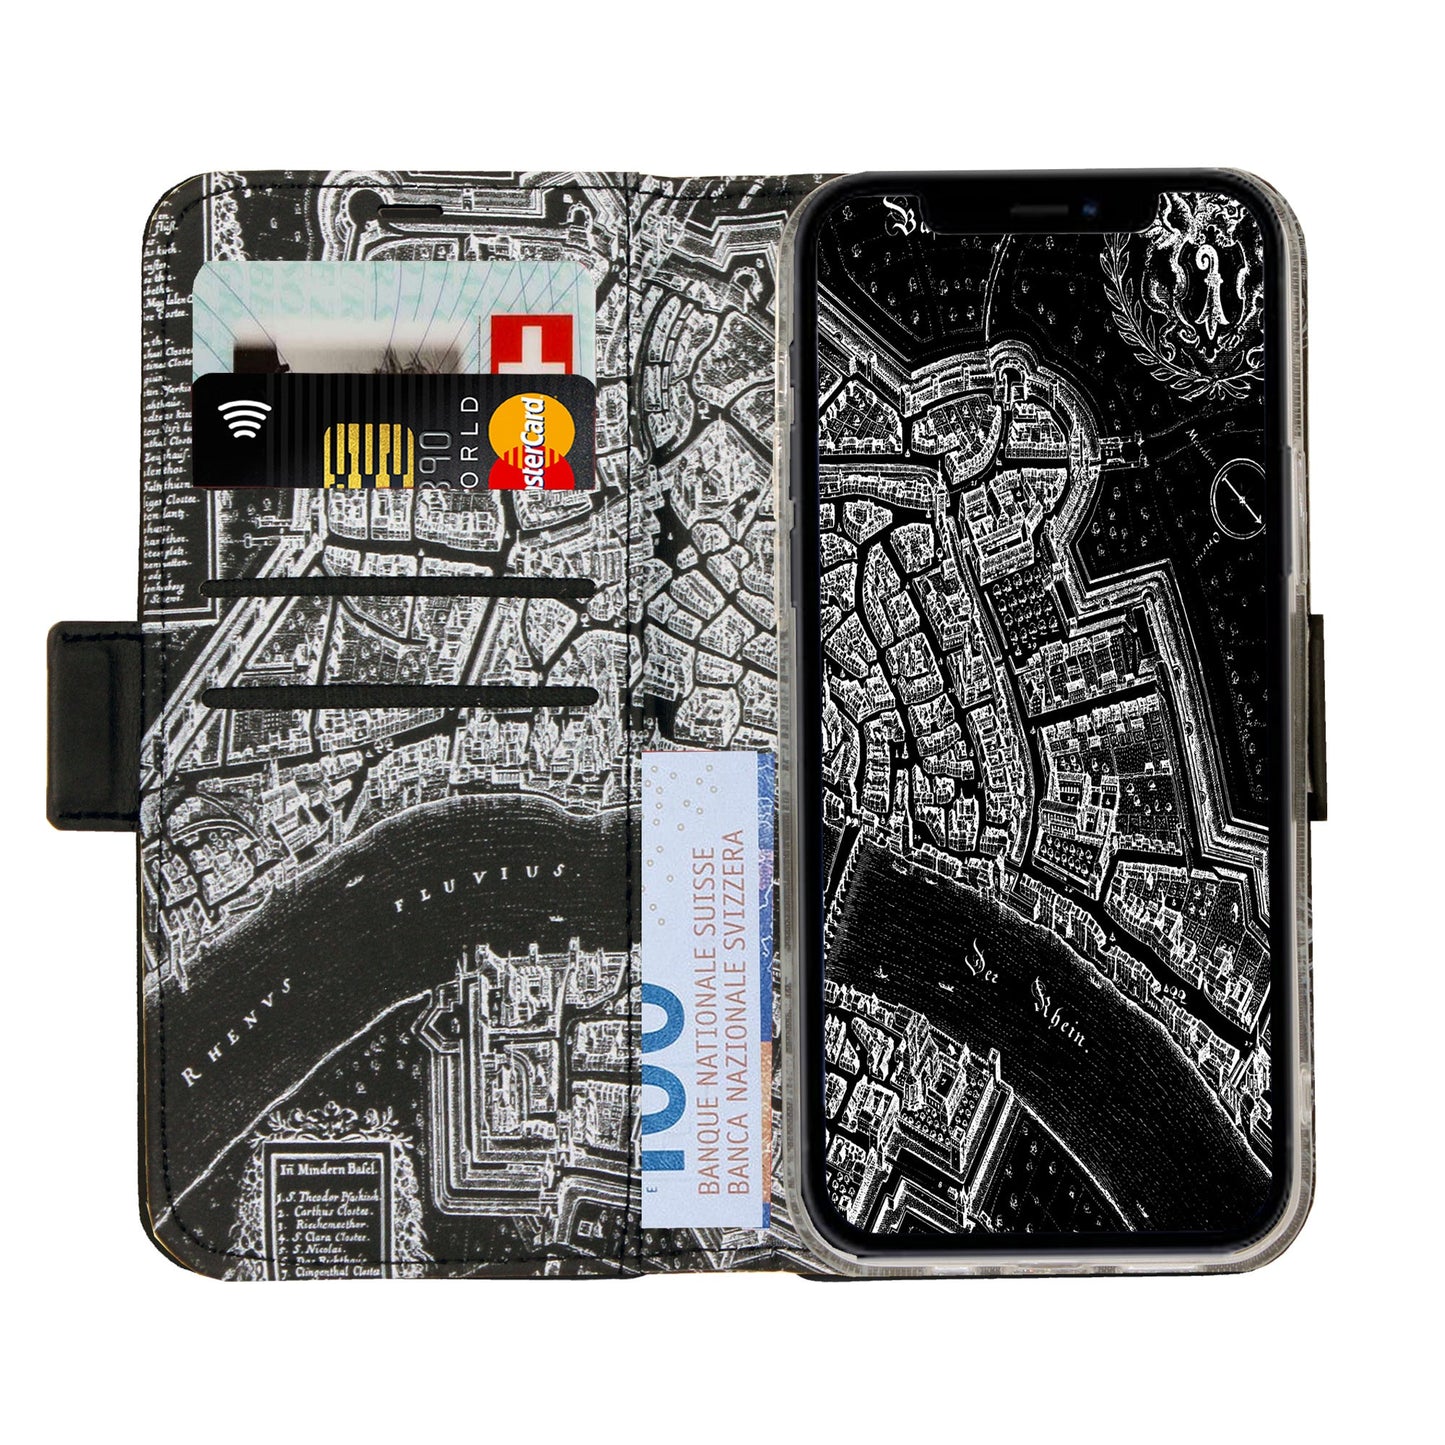 Basel Merian Negative Victor Case for iPhone 12 Pro Max